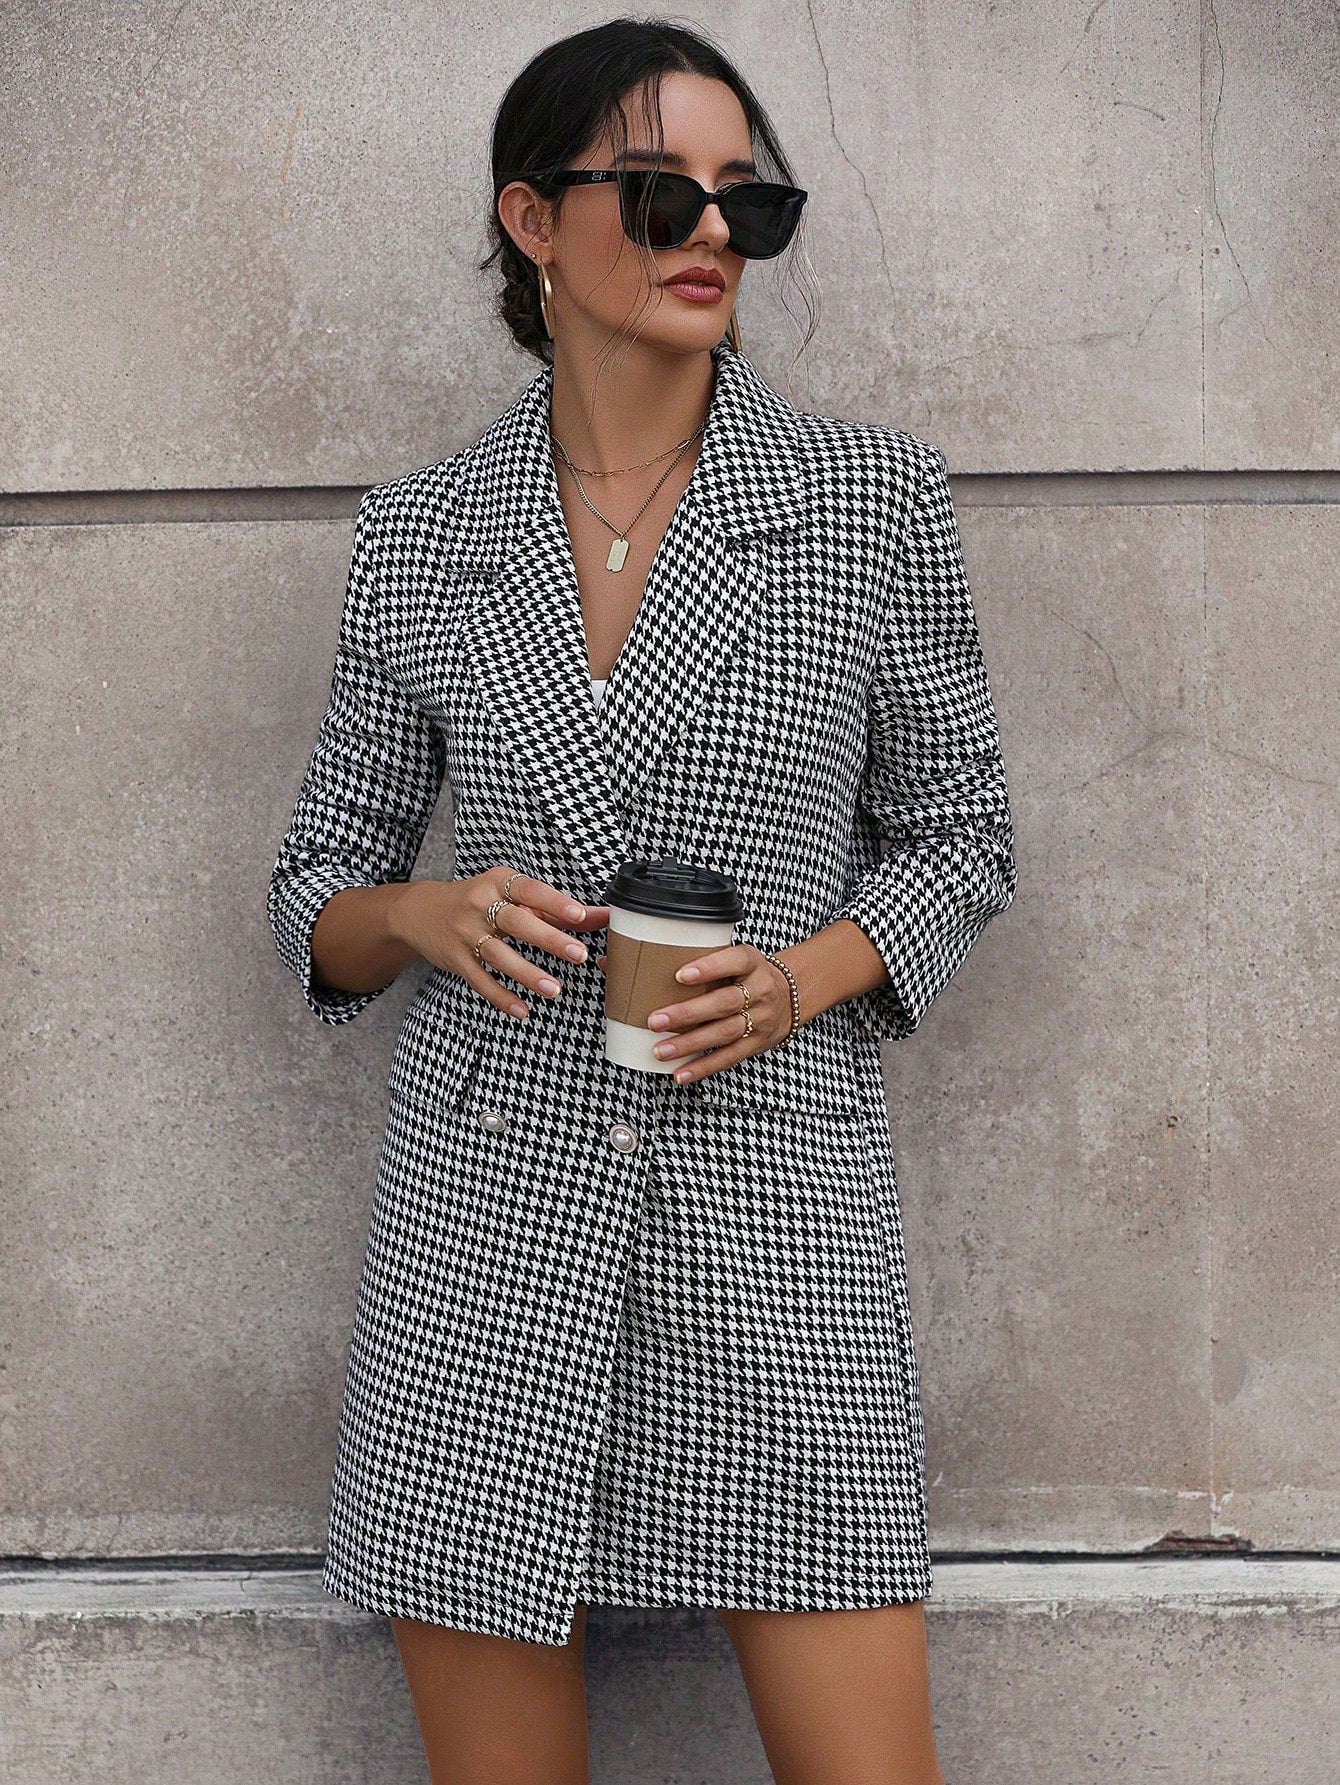 Chic Black and White Double-Breasted Blazer and Skirt Combo for Effortless Elegance